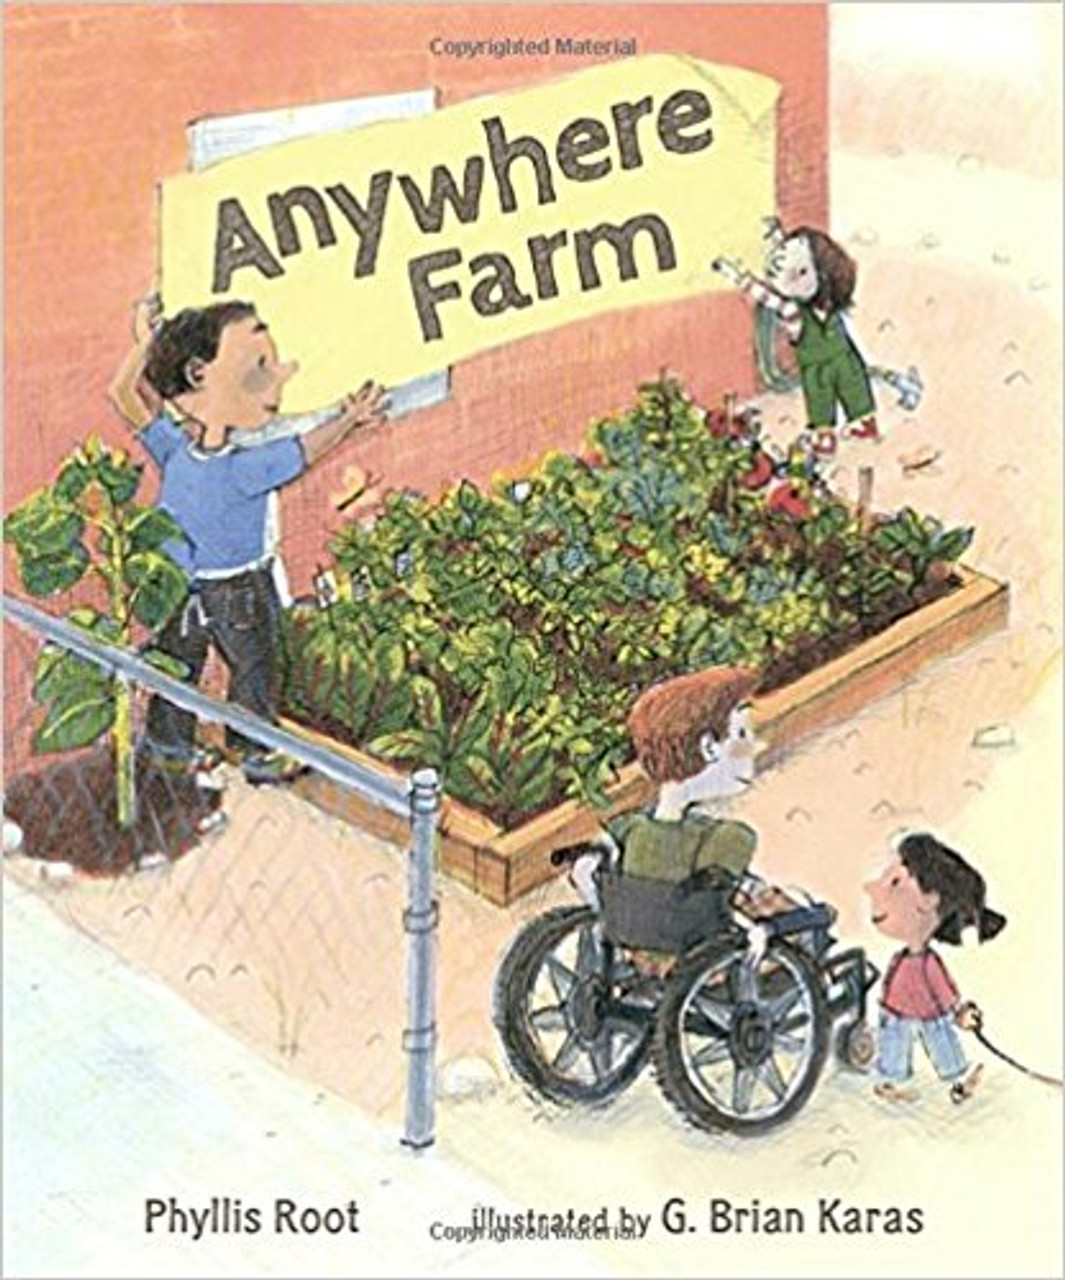 You might think a farm means fields, tractors, and a barnyard full of animals. But you can plant a farm anywhere you like: a box or a bucket, a boot or a pan--almost anything can be turned into a home for green, growing things. Windows, balconies, and front steps all make wonderful spots to start